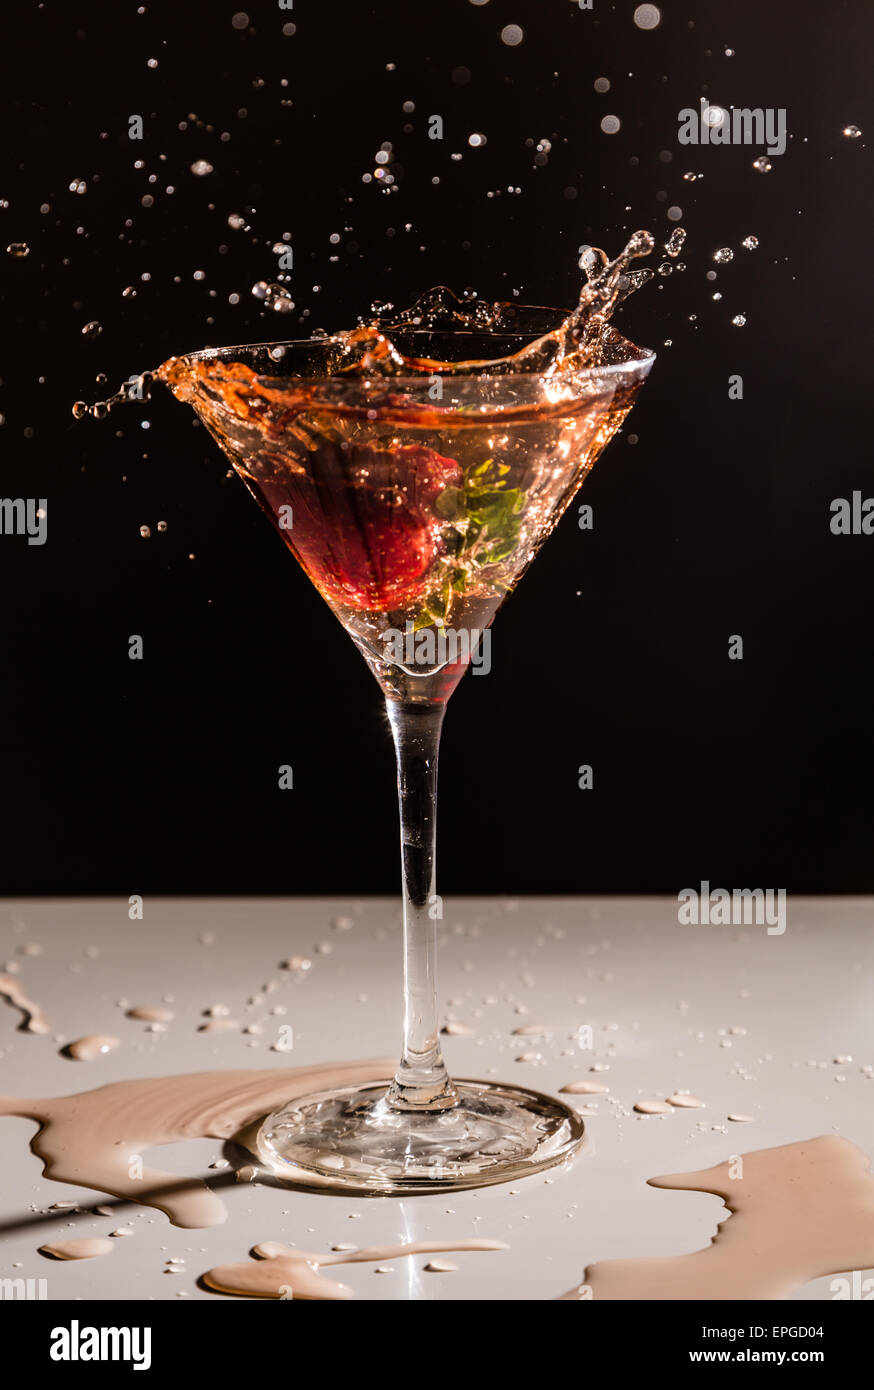 A strawberry dropping into a cocktail glass Stock Photo